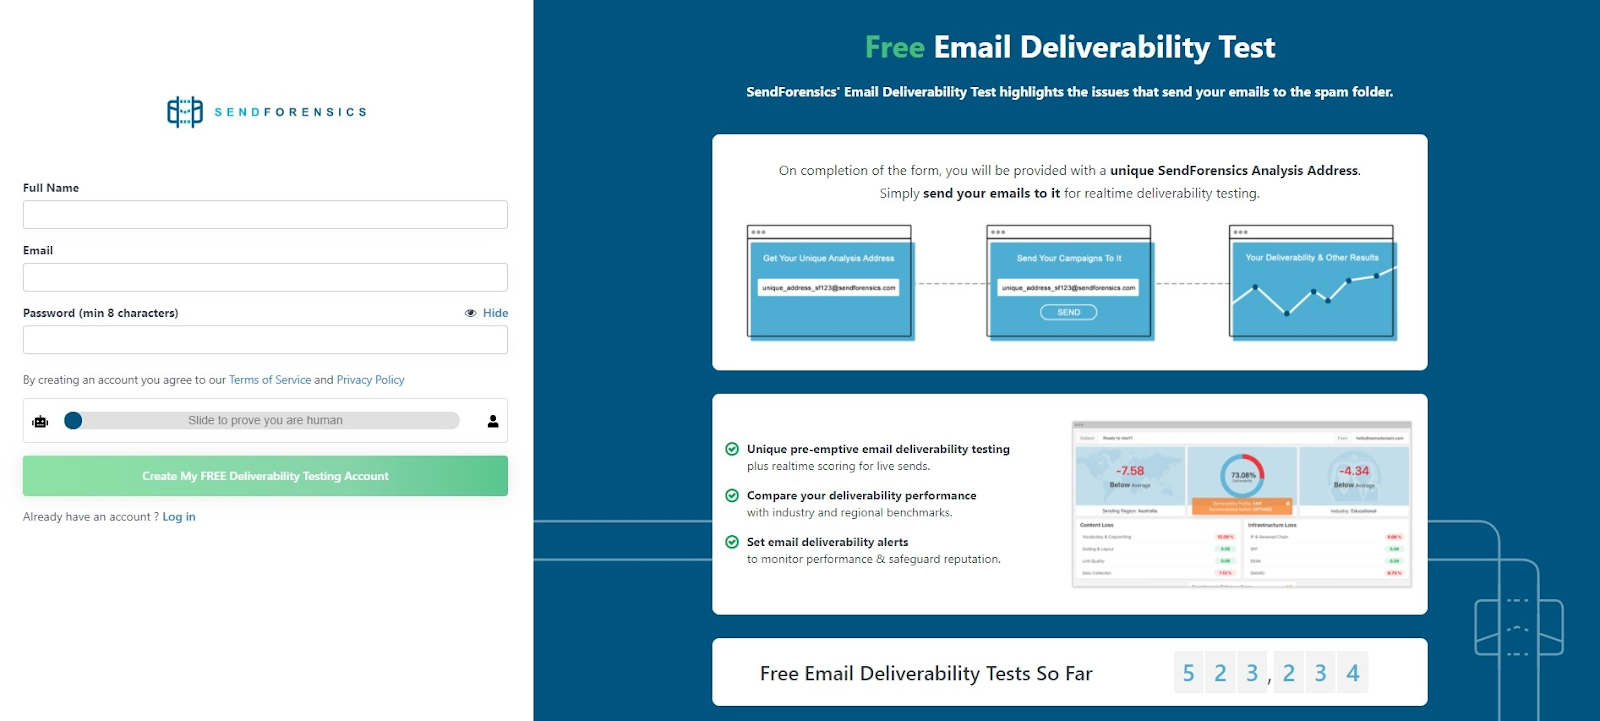 Free Email Deliverability Test